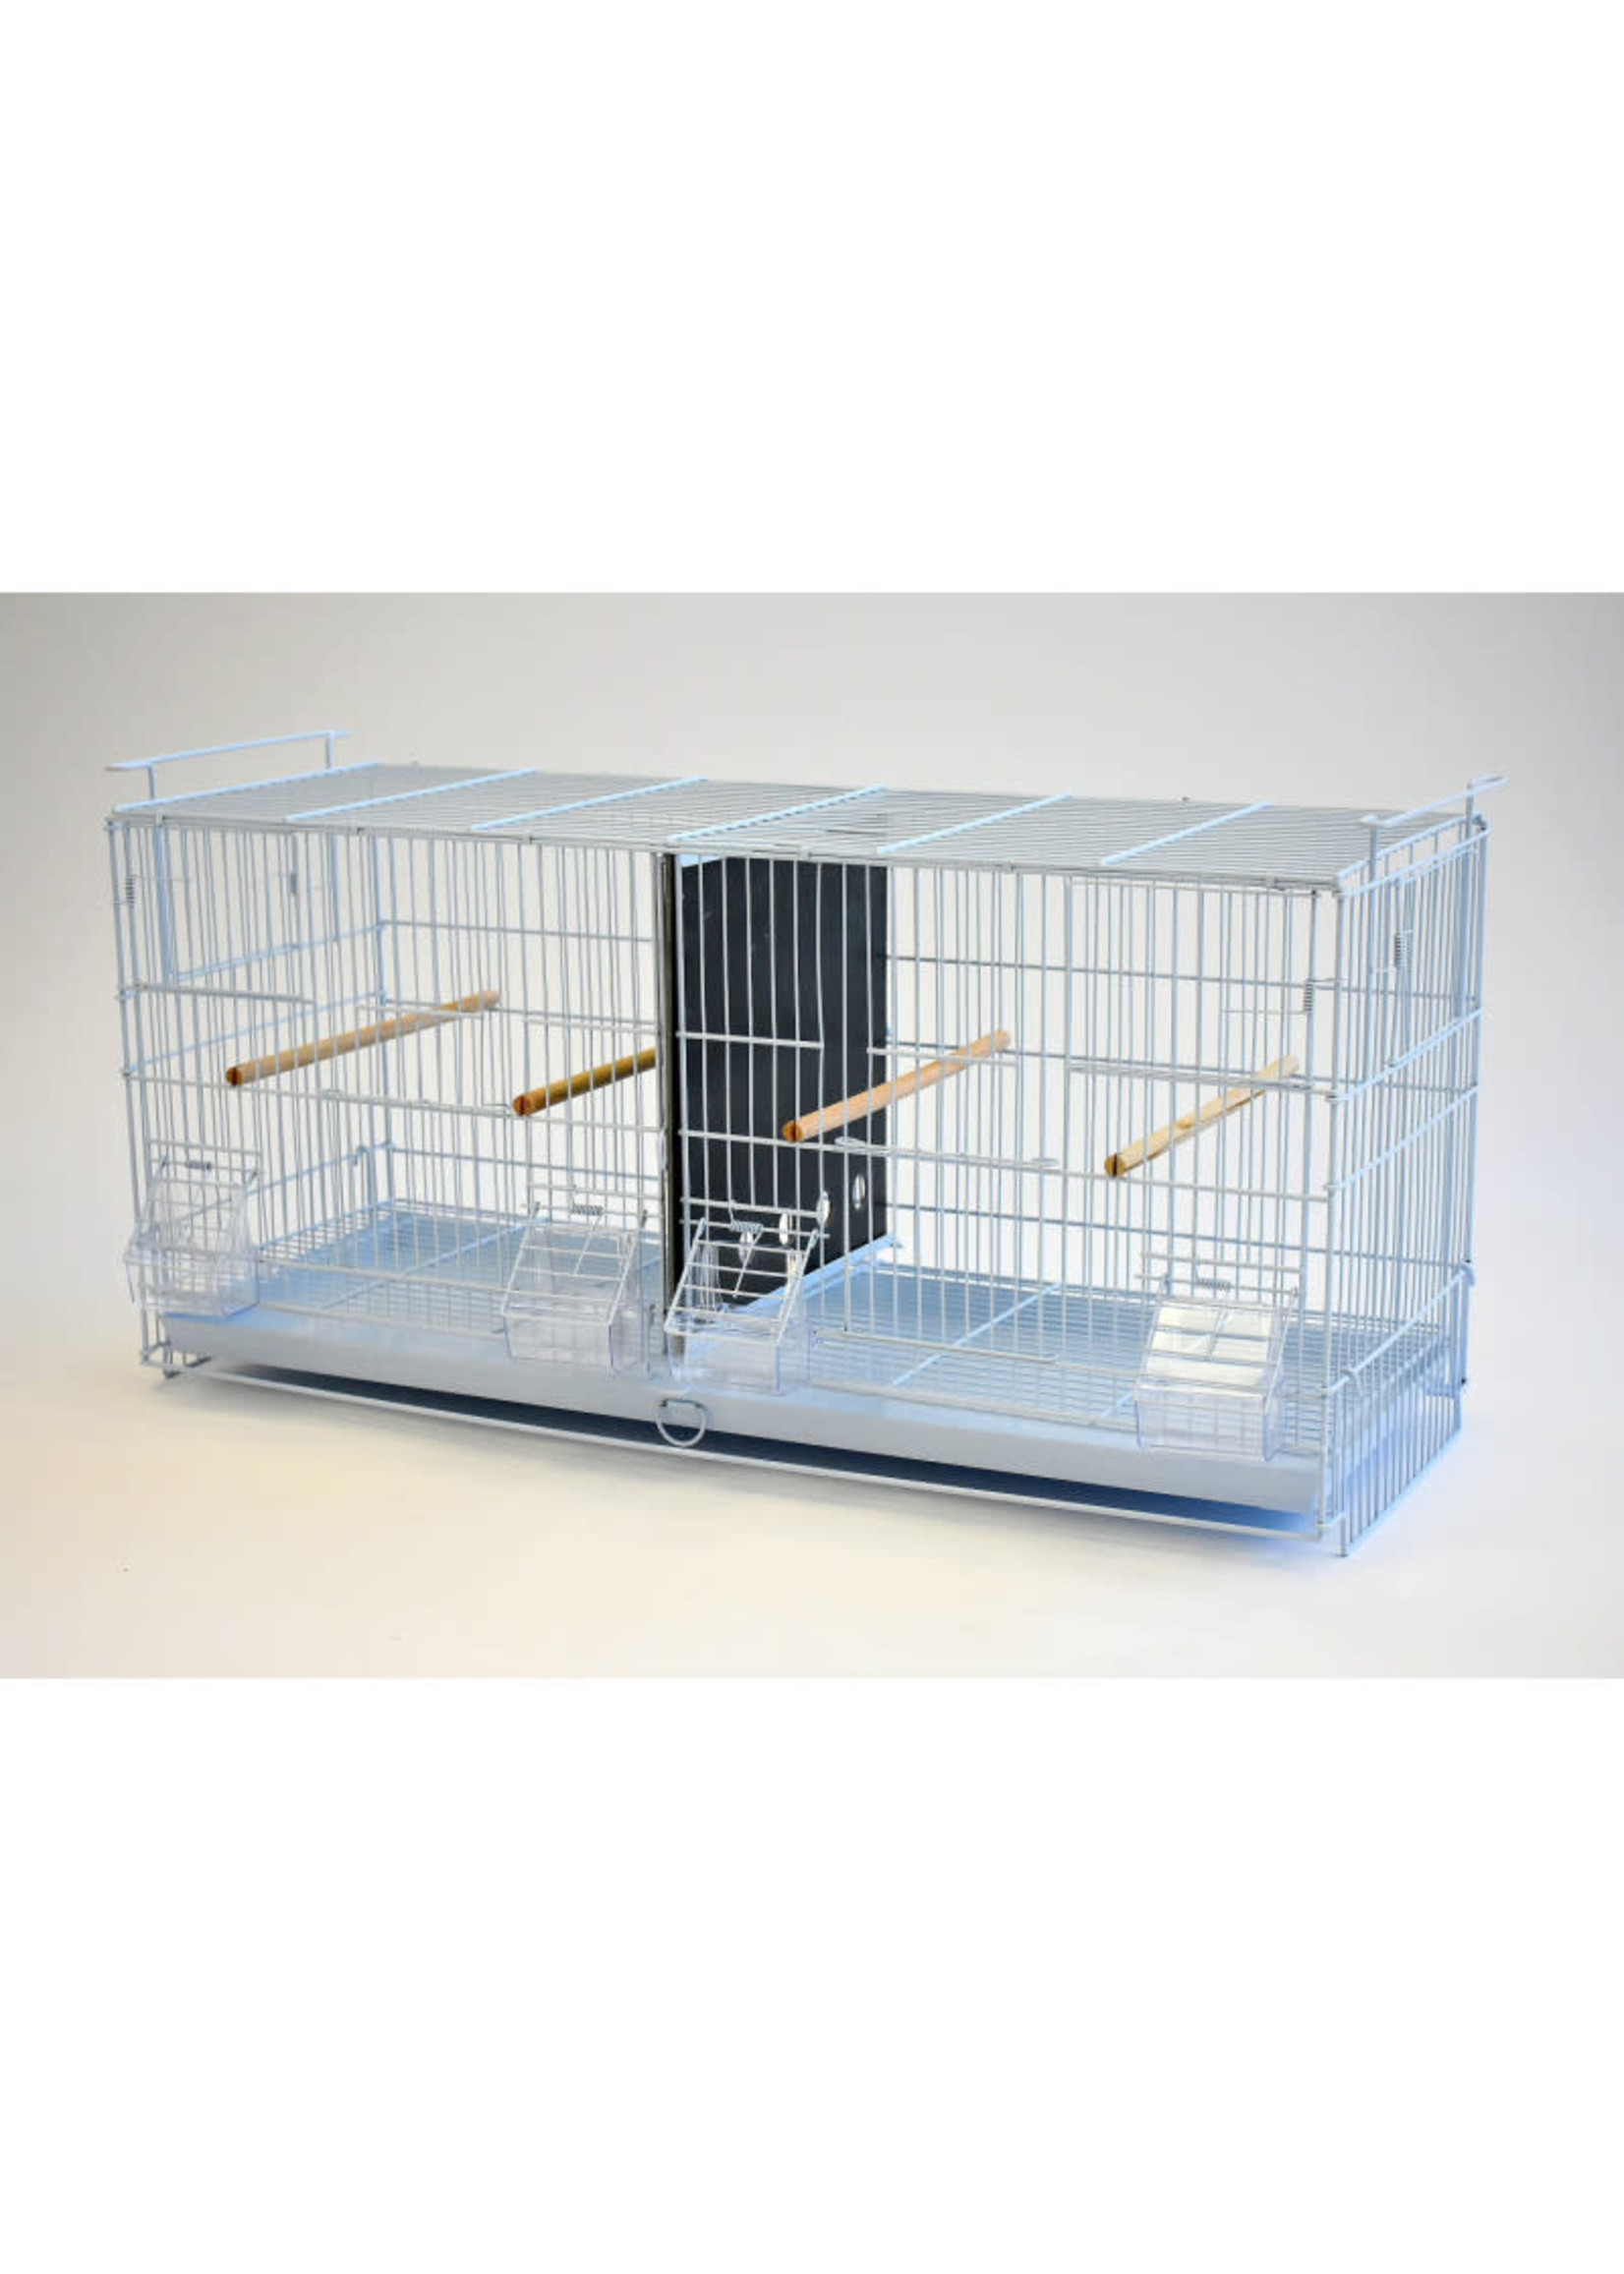 Glitter Pets GLITTER PET STACKED FINCH CANARY BREEDER CAGES (BR04) 30"(set of of 4 cages)